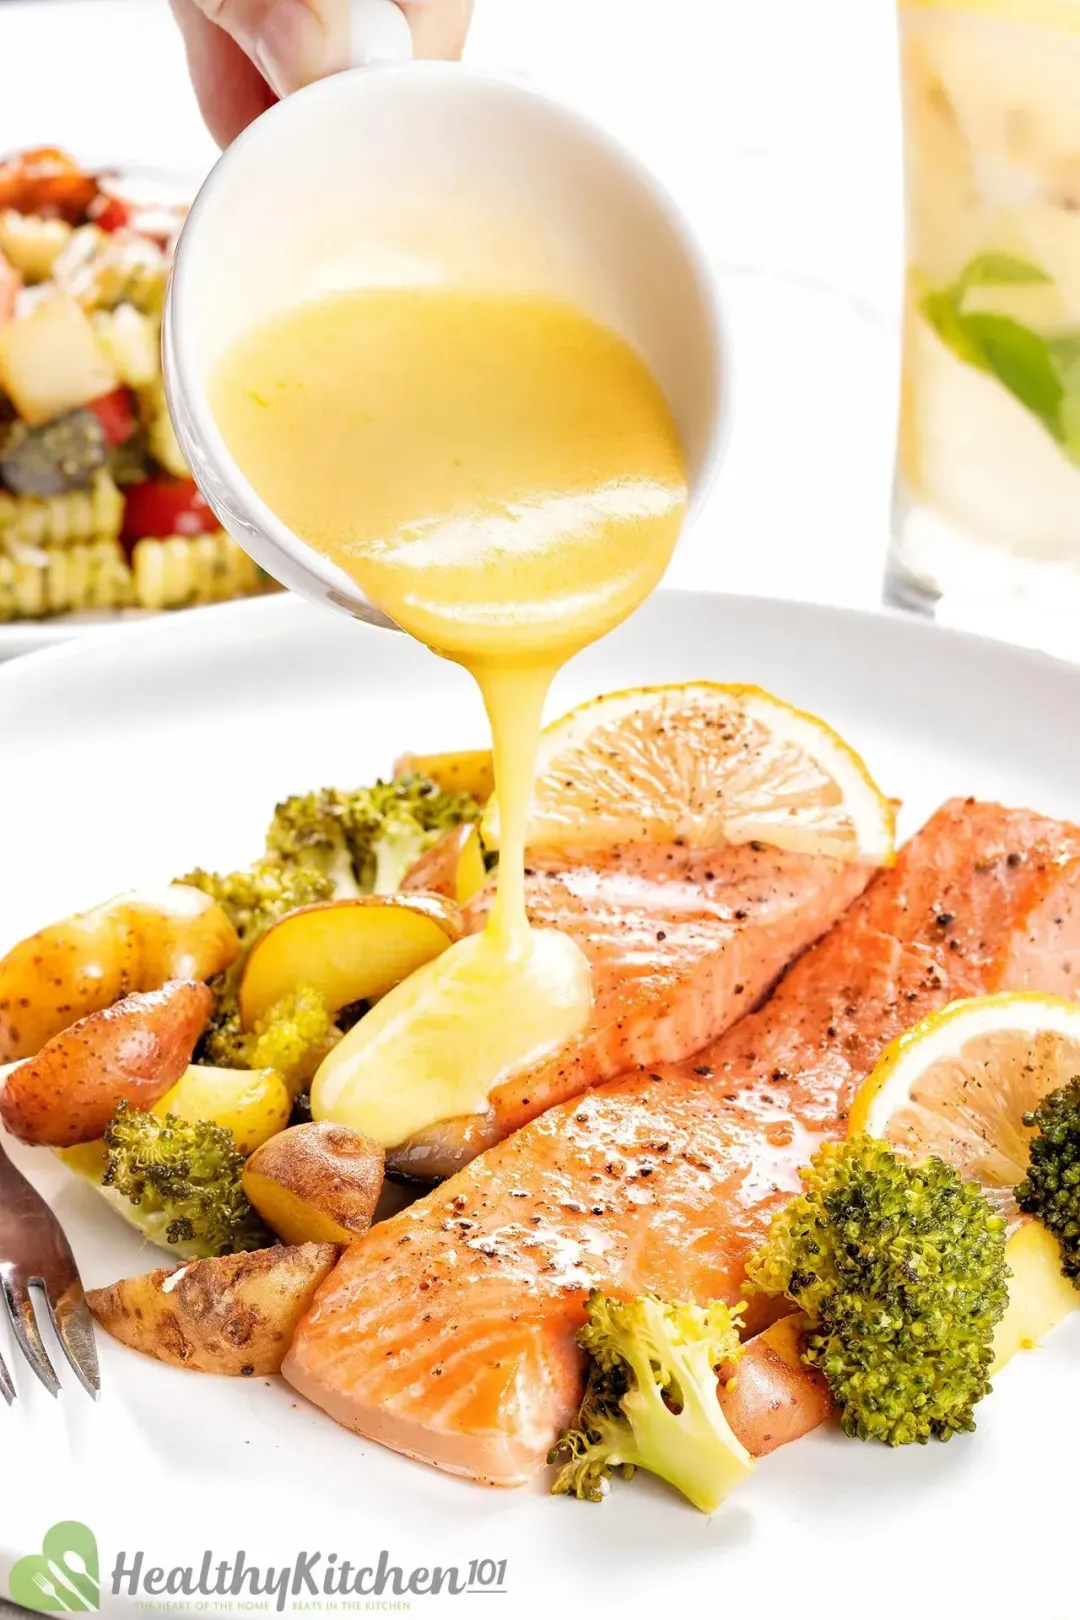 A yellow buttery sauce is being poured on a baked salmon filet served on a plate filled with baked potato and broccoli pieces.